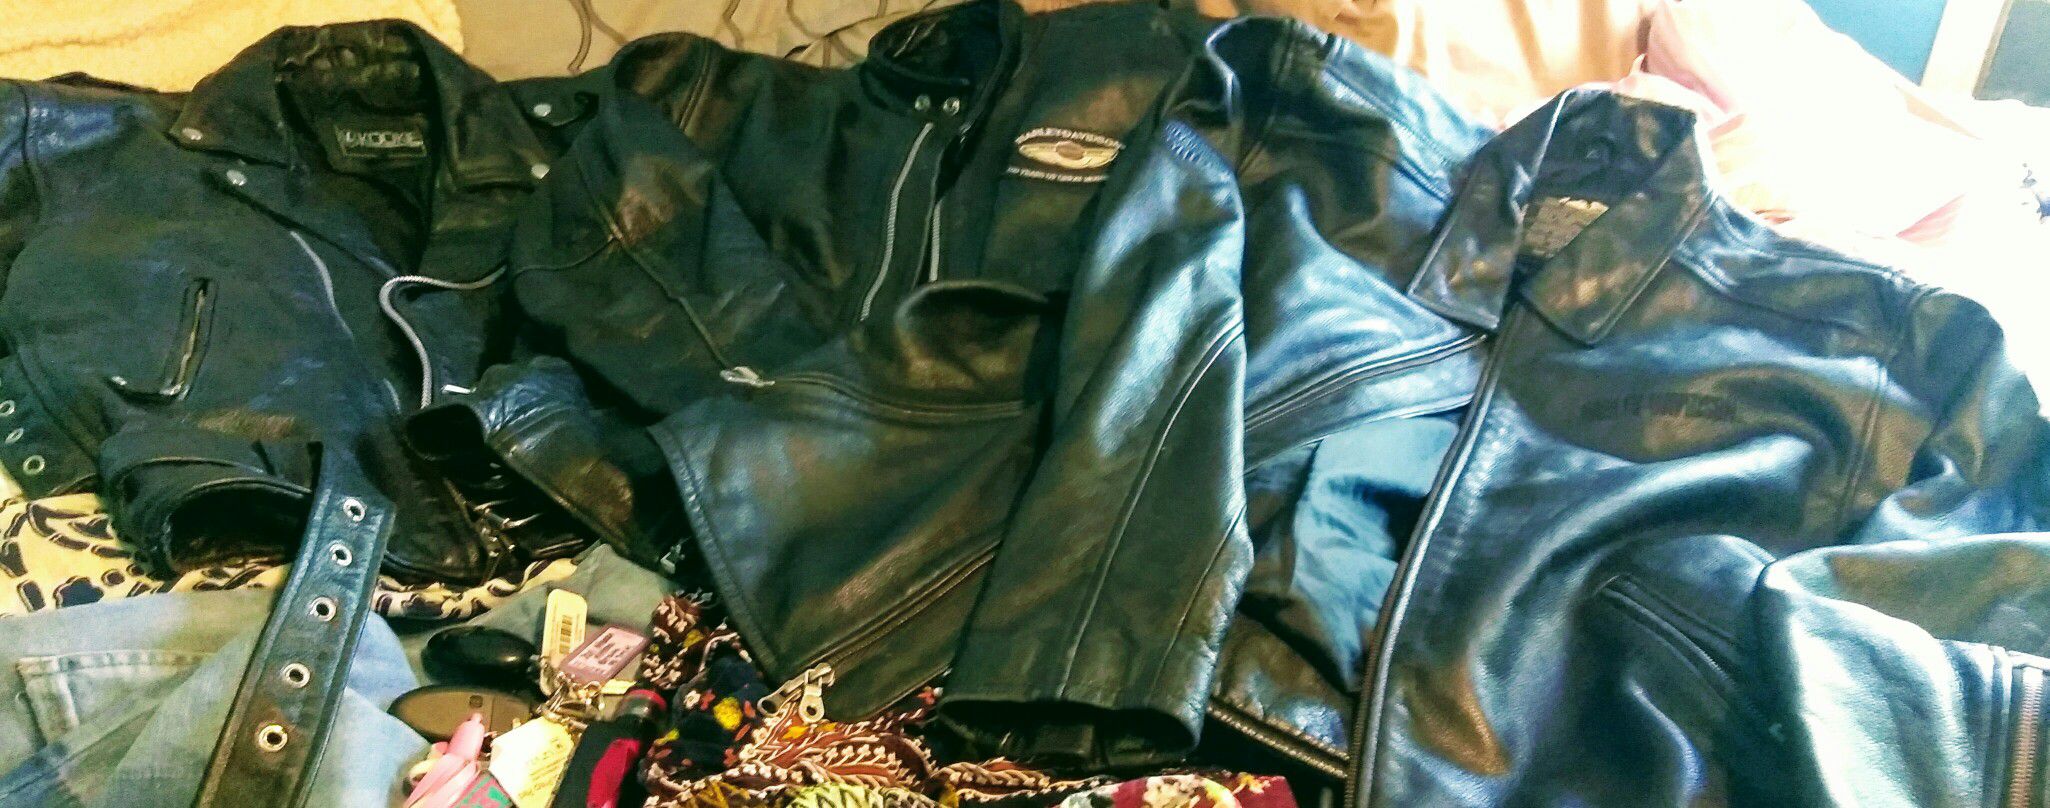 Leather motorcycle jackets